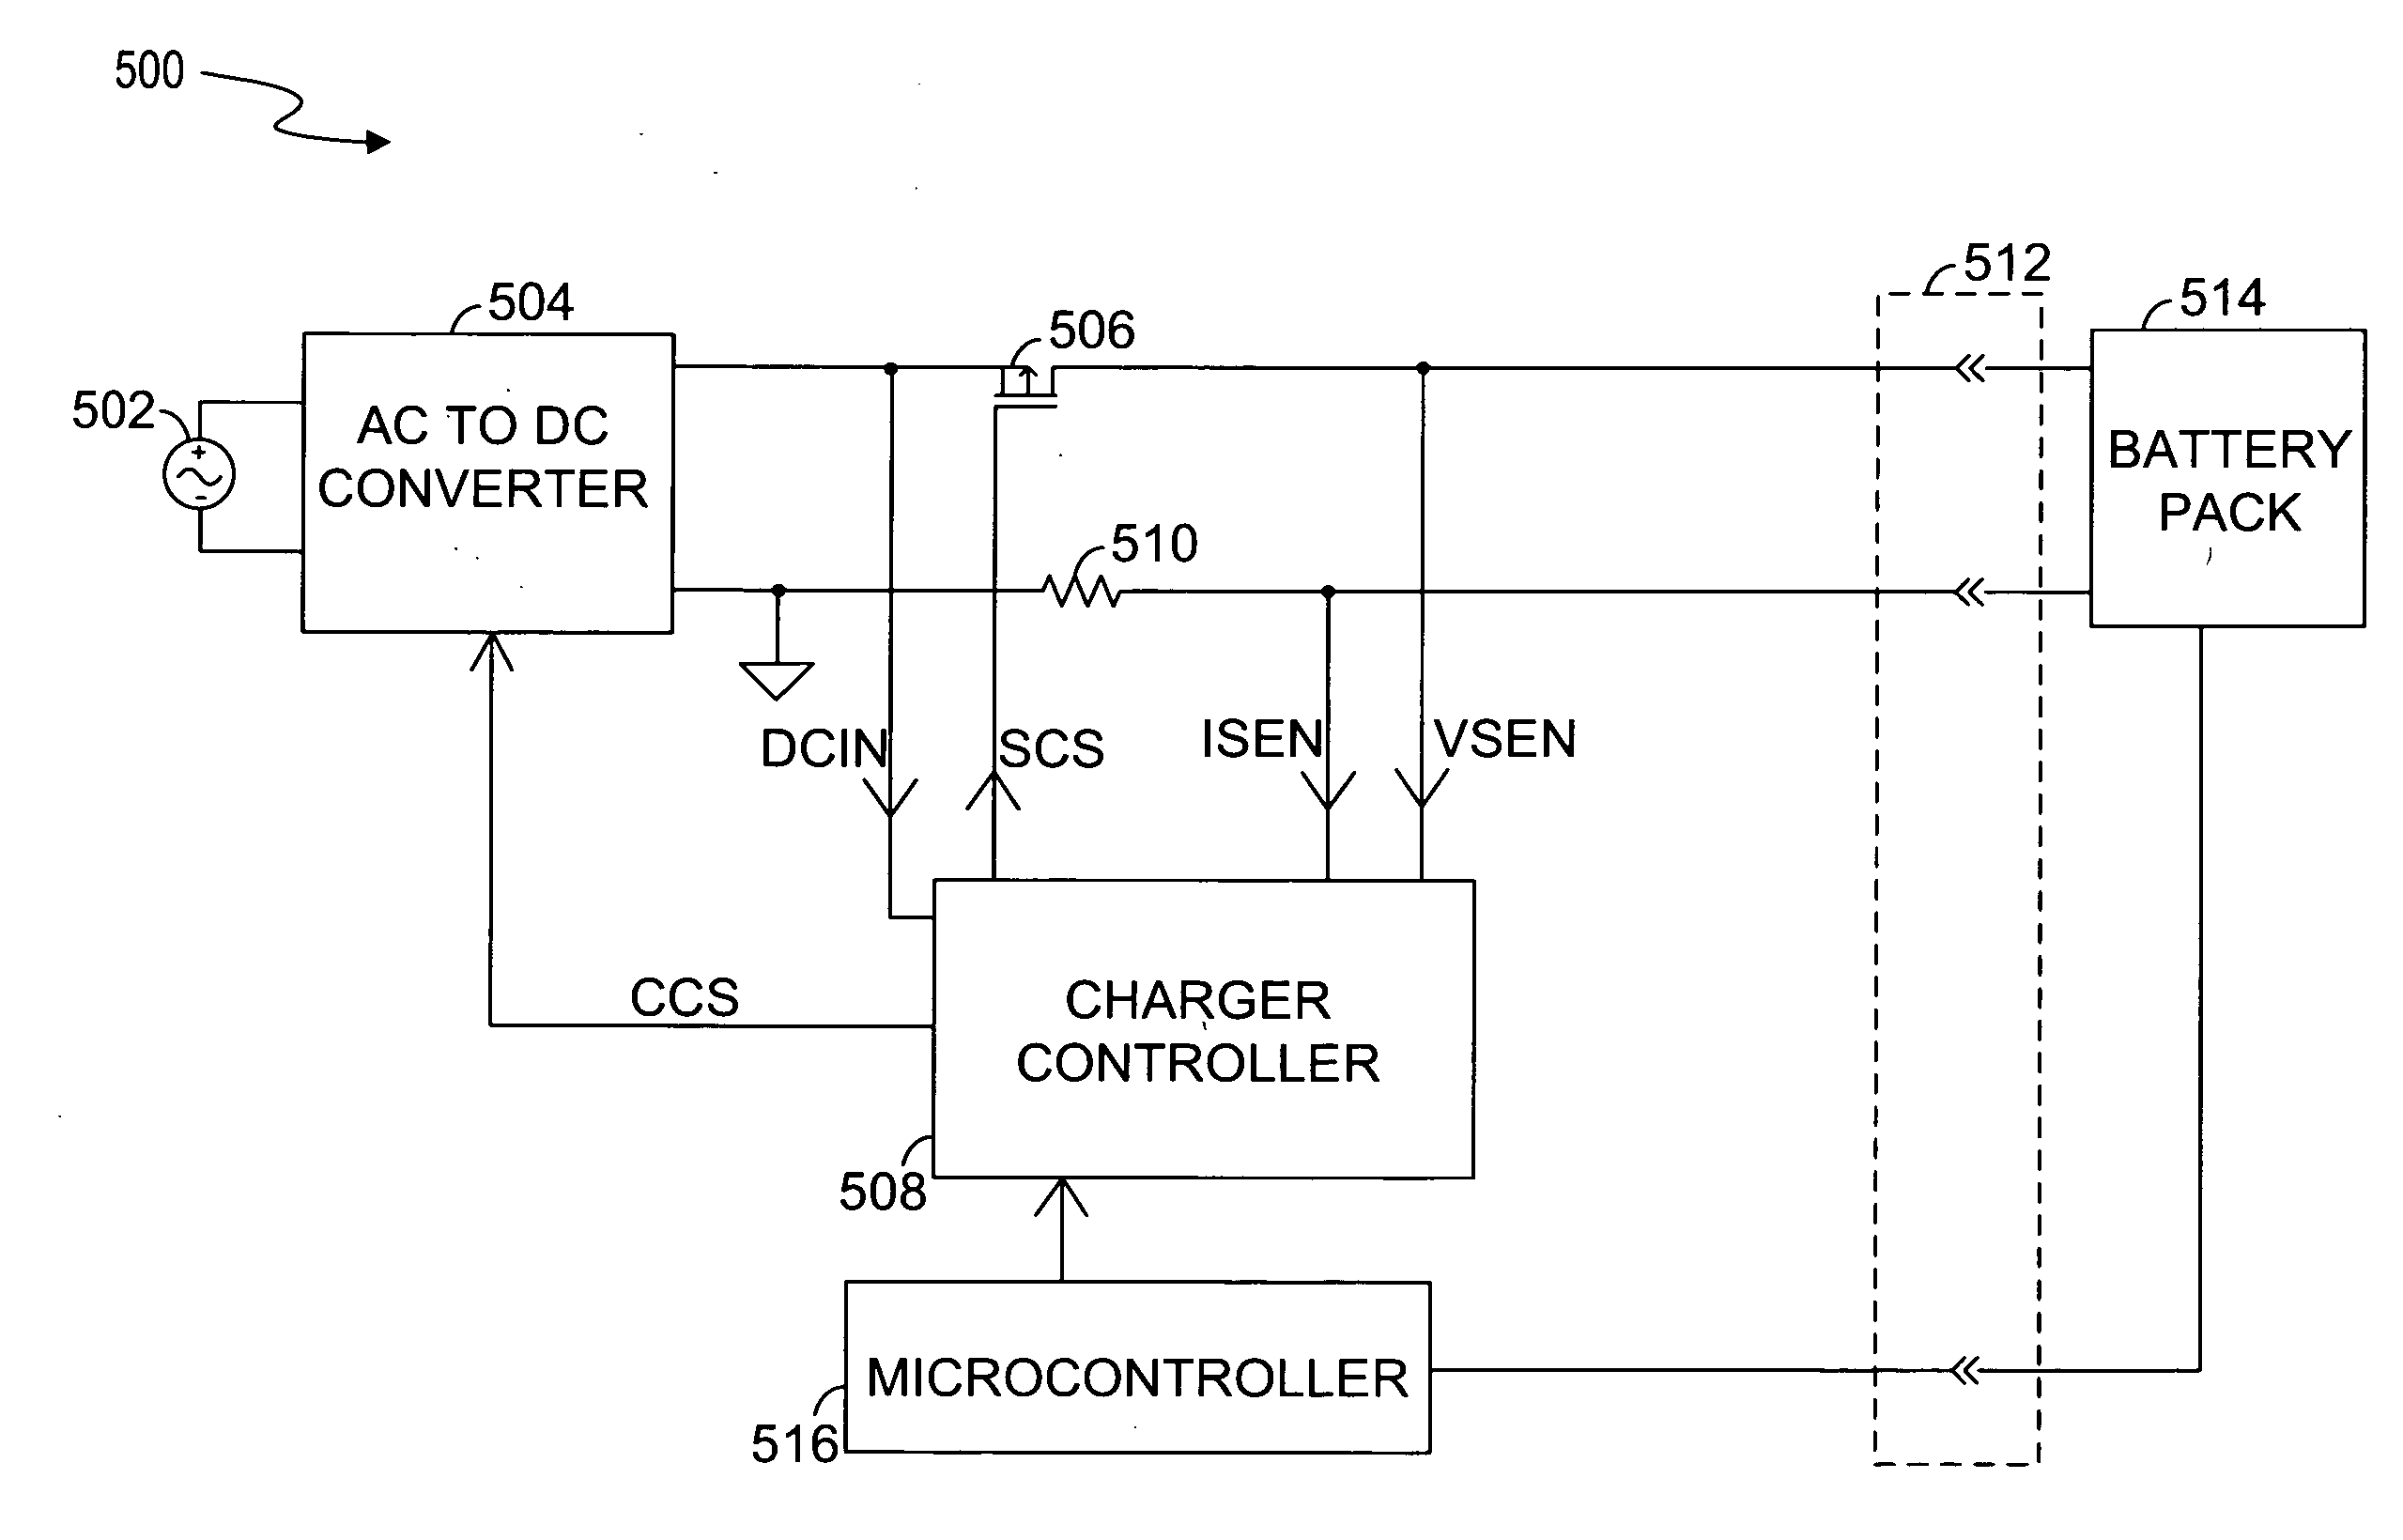 Circuits and methods for battery charging